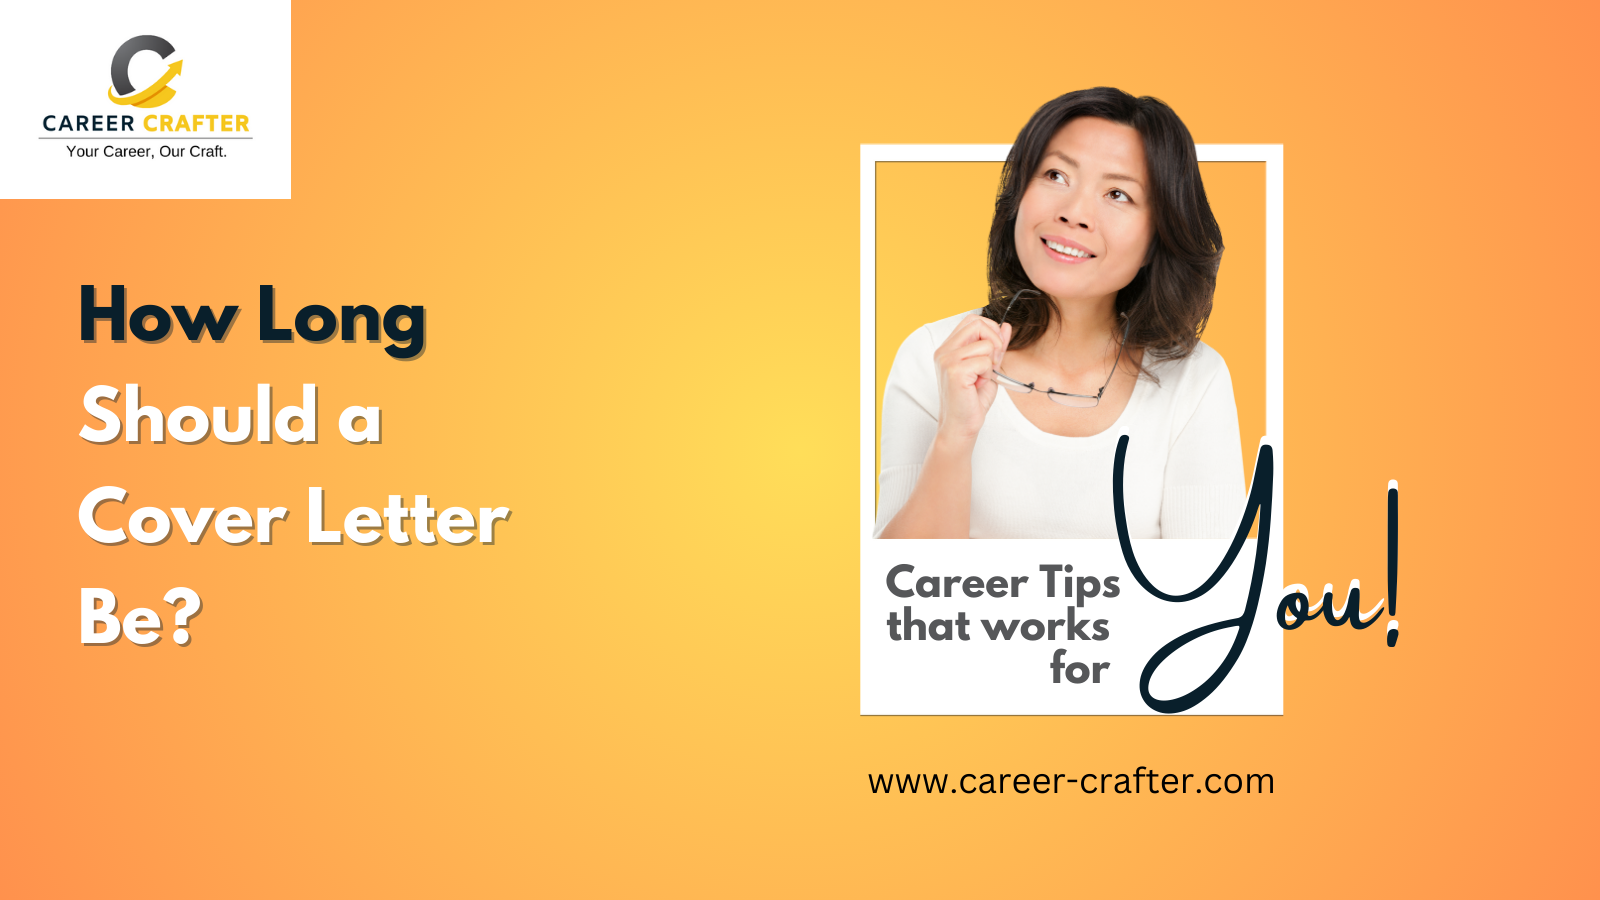 how-long-should-a-cover-letter-be-career-crafter